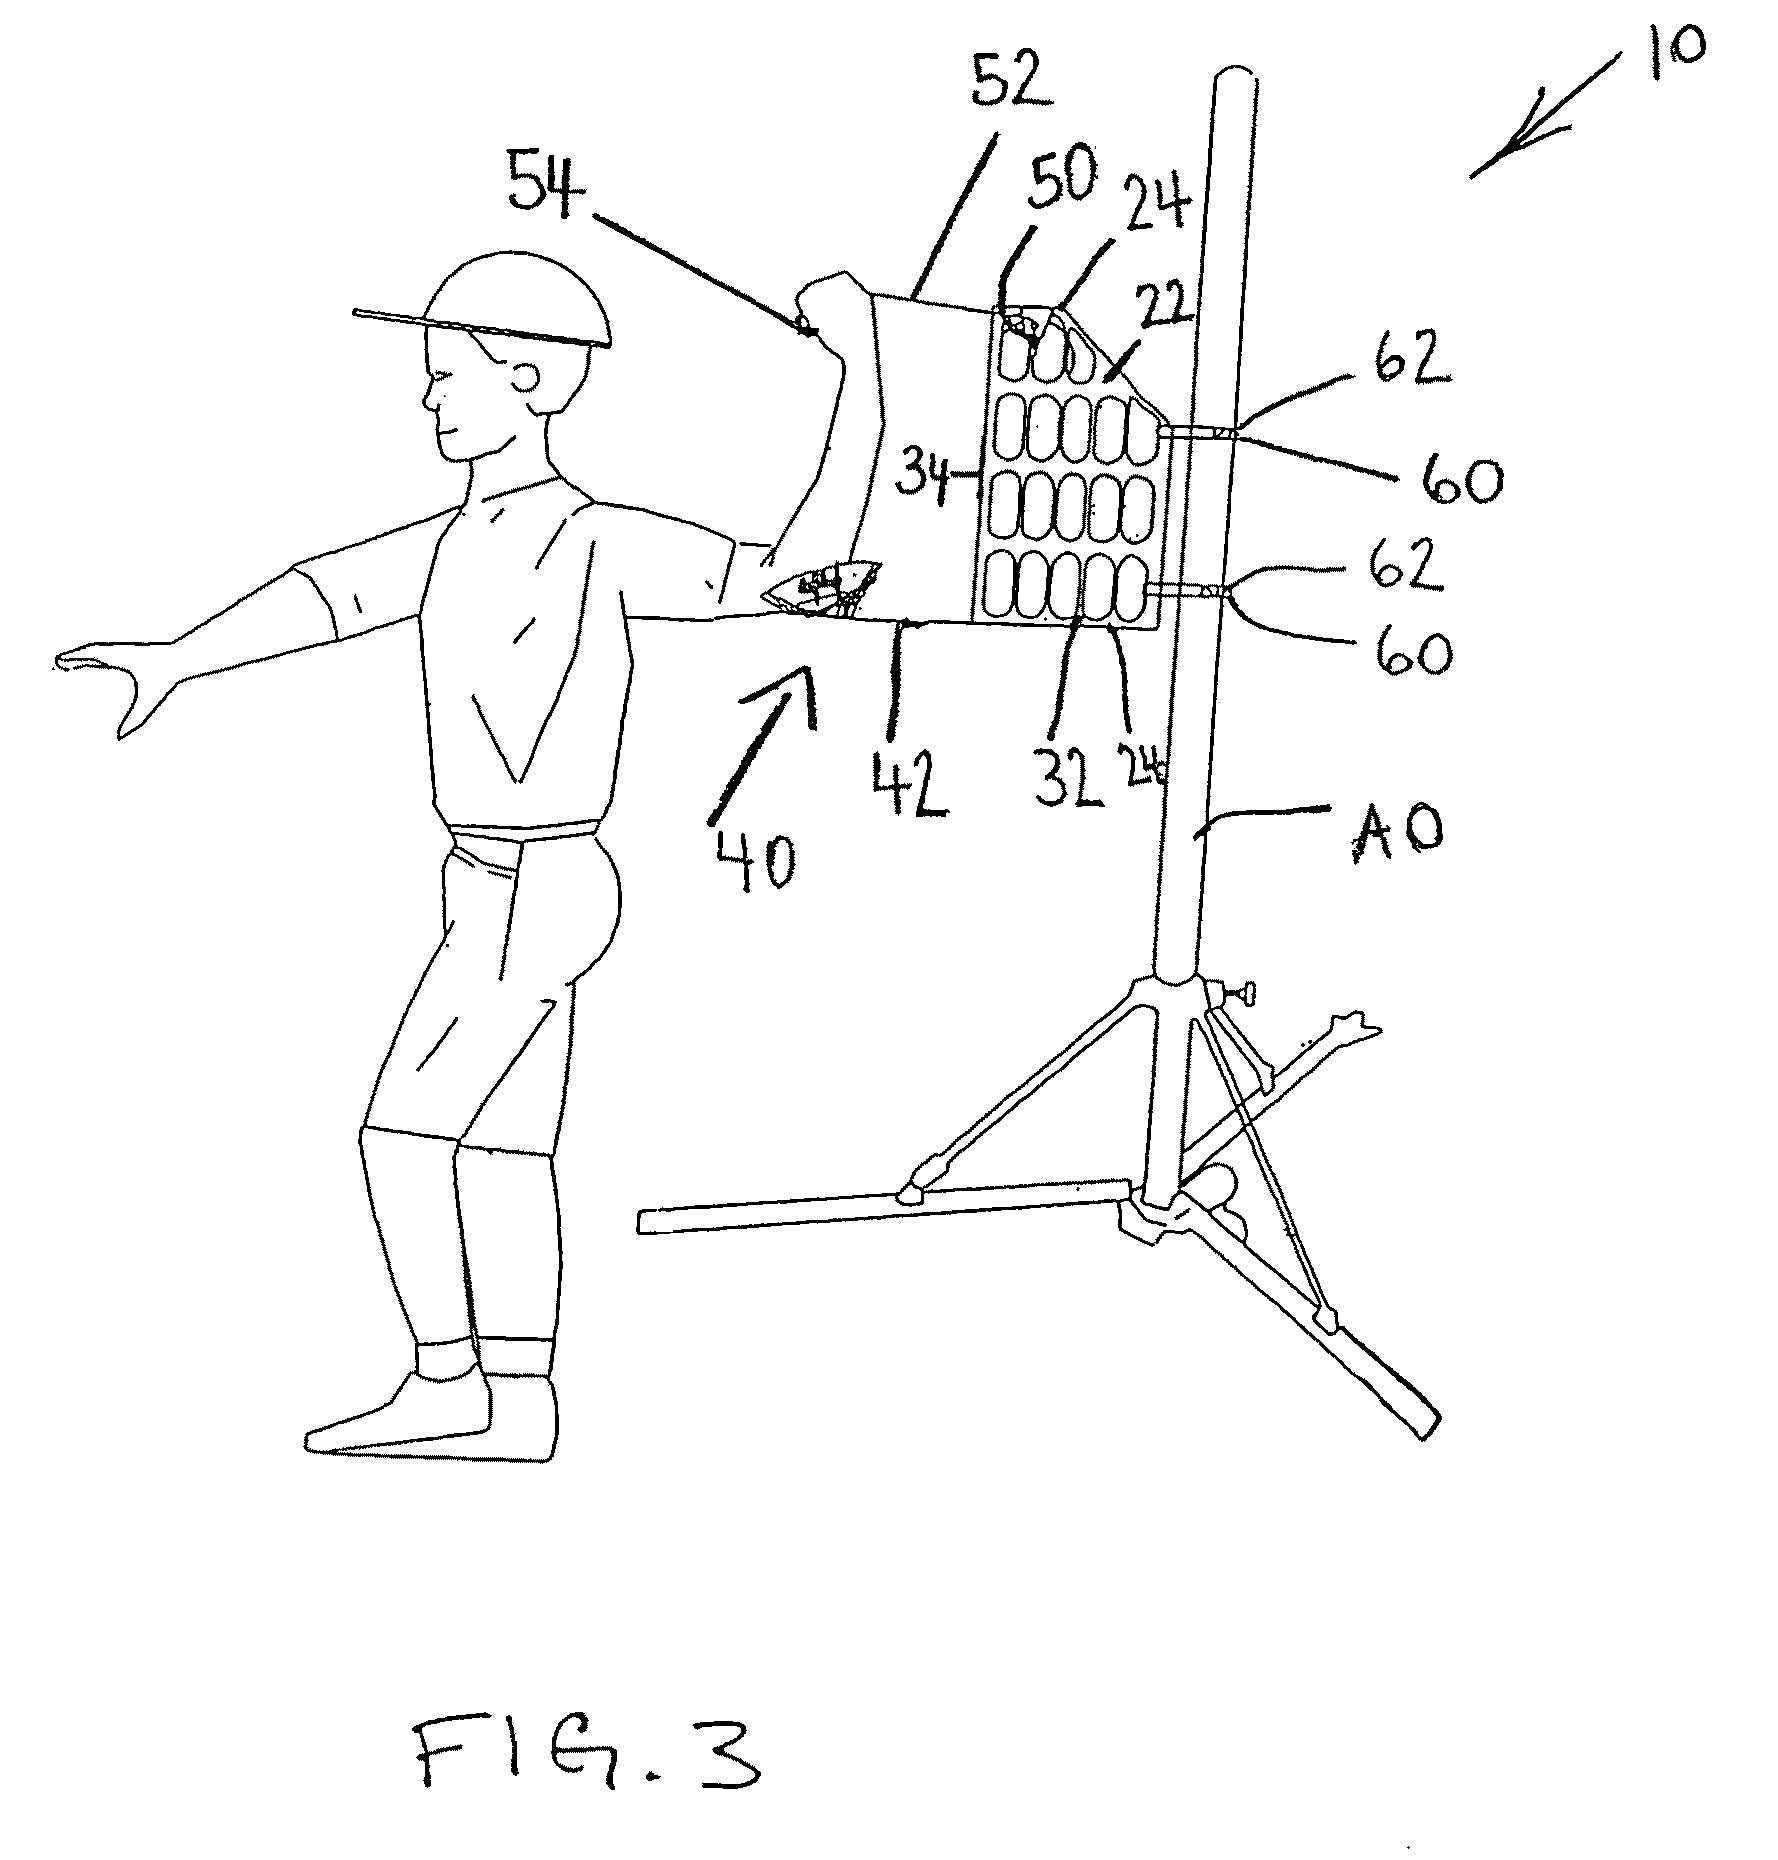 Ball throwing muscle training apparatus